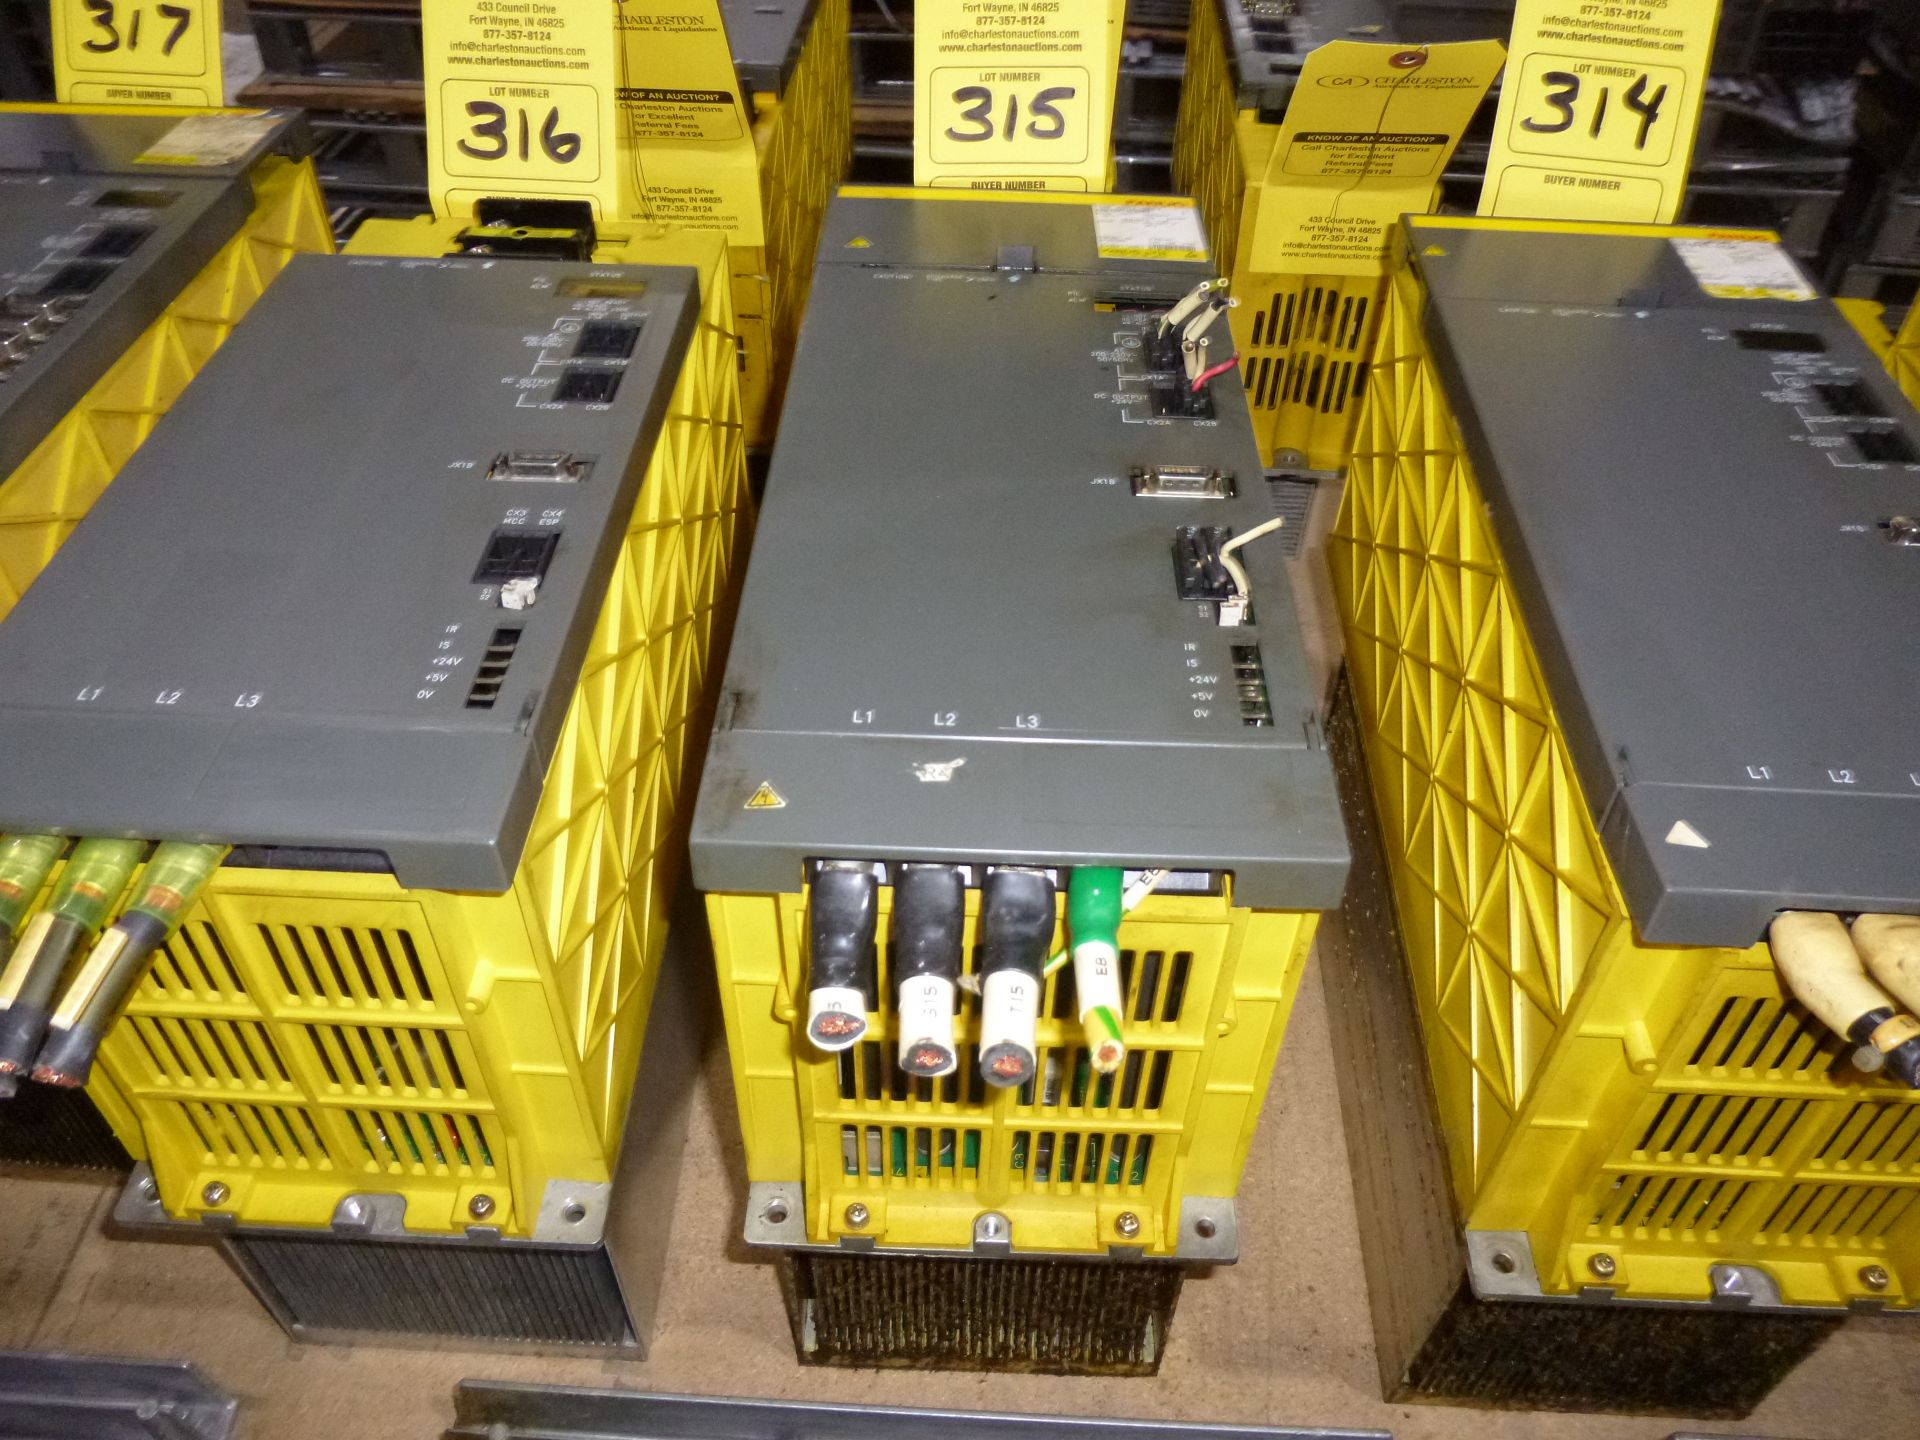 Fanuc power supply module model A06B-6087-H130 #EM, as always with Brolyn LLC auctions, all lots can